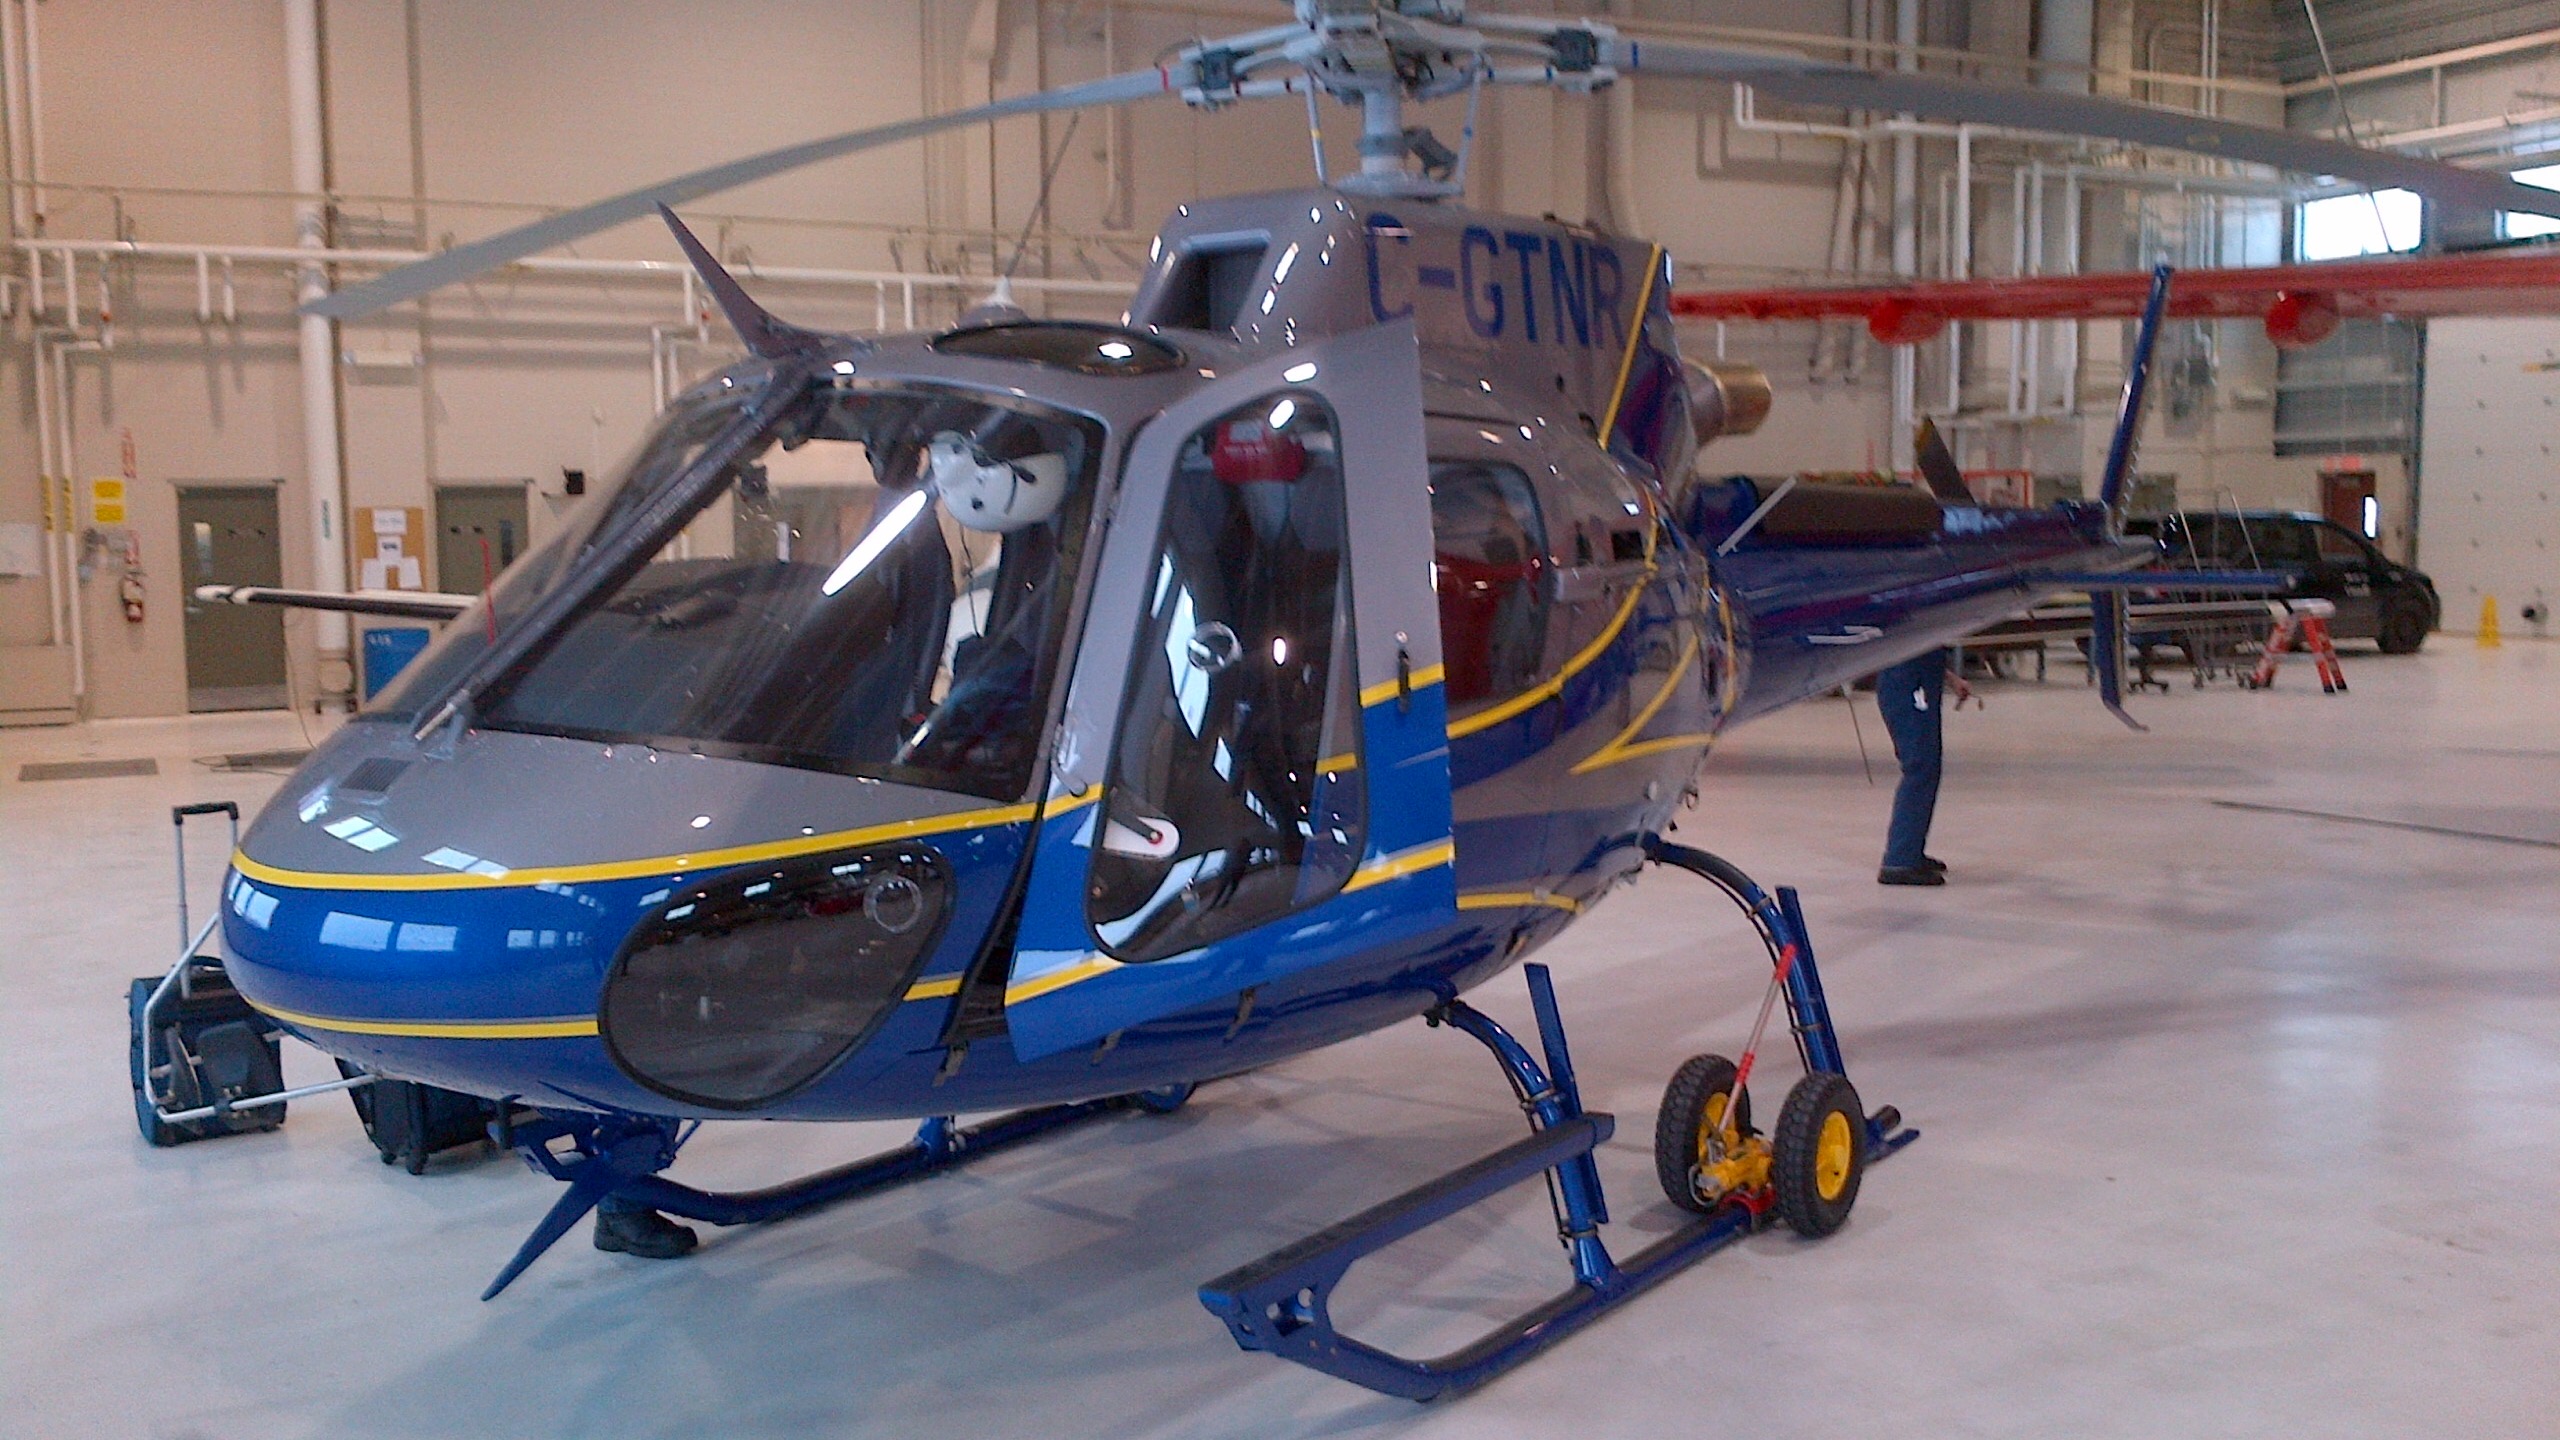 One of DNR's new H125 helicopters.